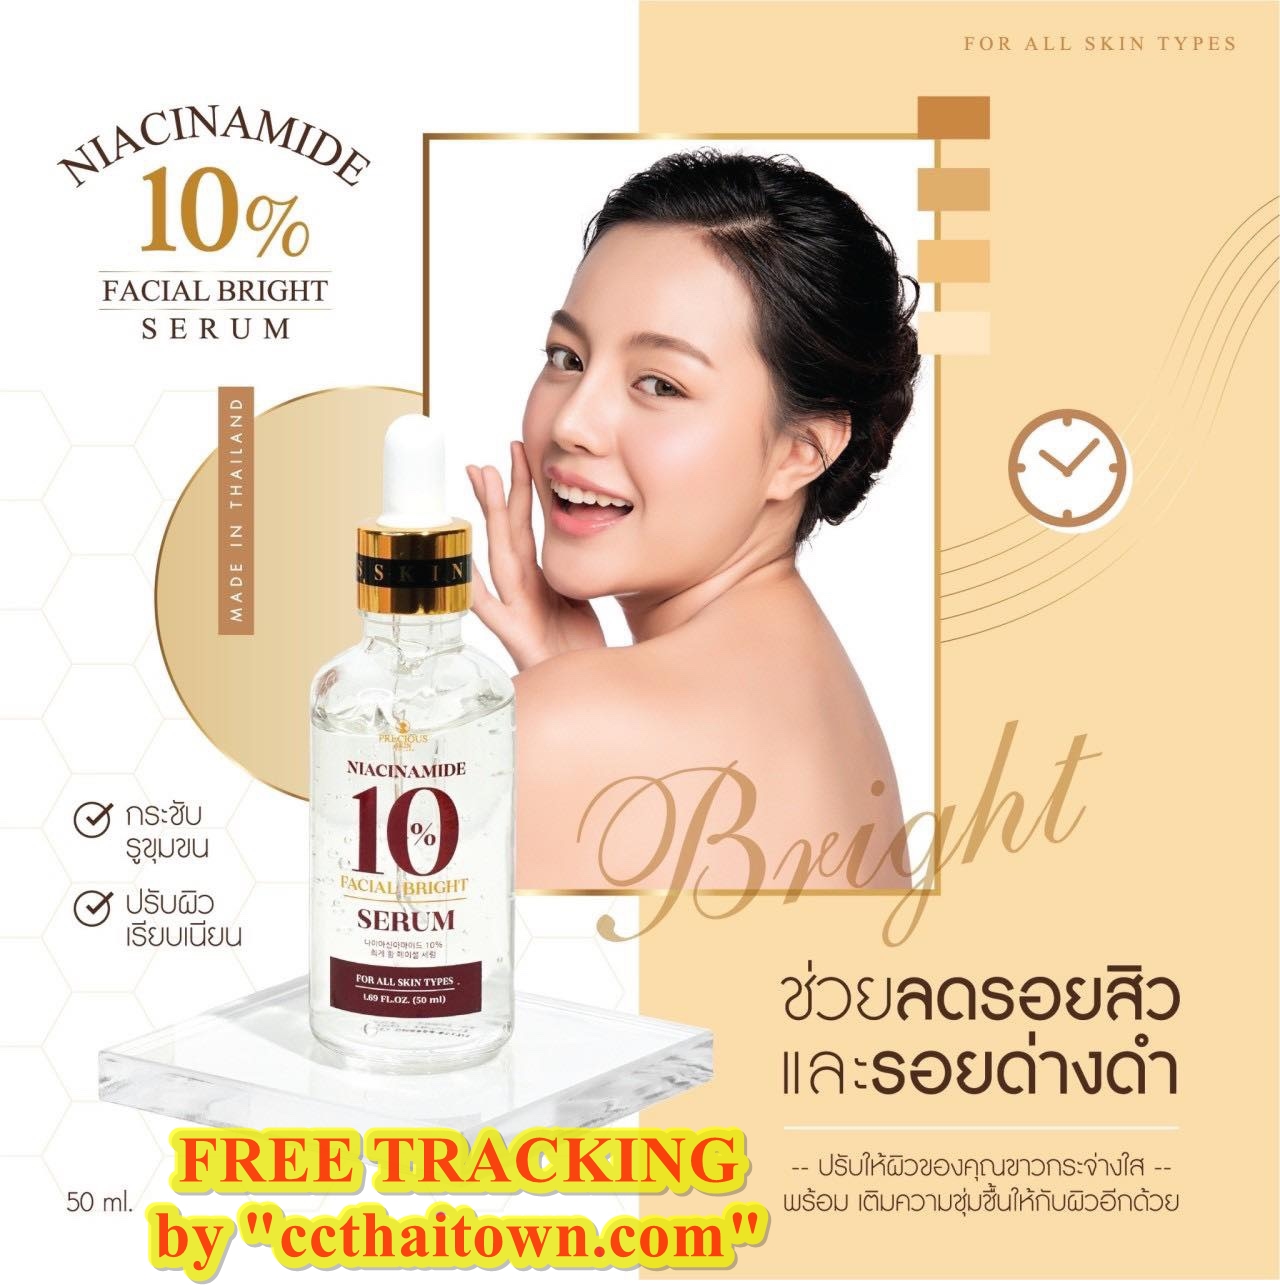 NIACINAMIDE 10% FACIAL BRIGHT SERUM REDUCE SPOT WHITENING FACE by www.ccthaitown.com